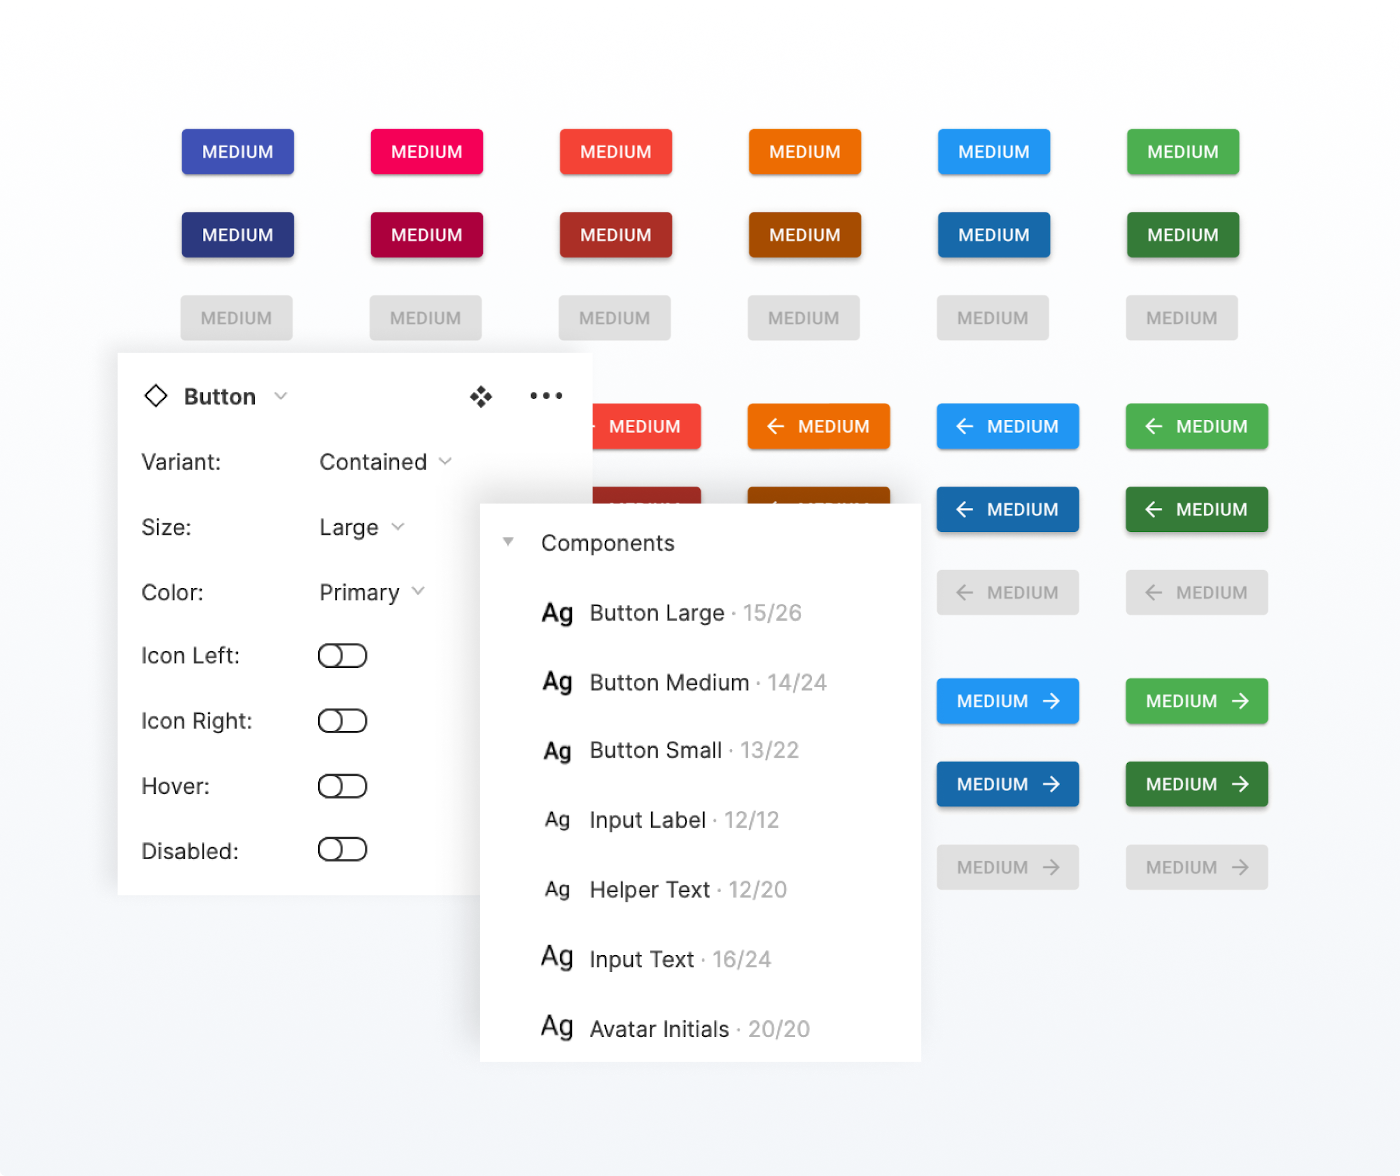 Screenshot of buttons in the Figma design kit